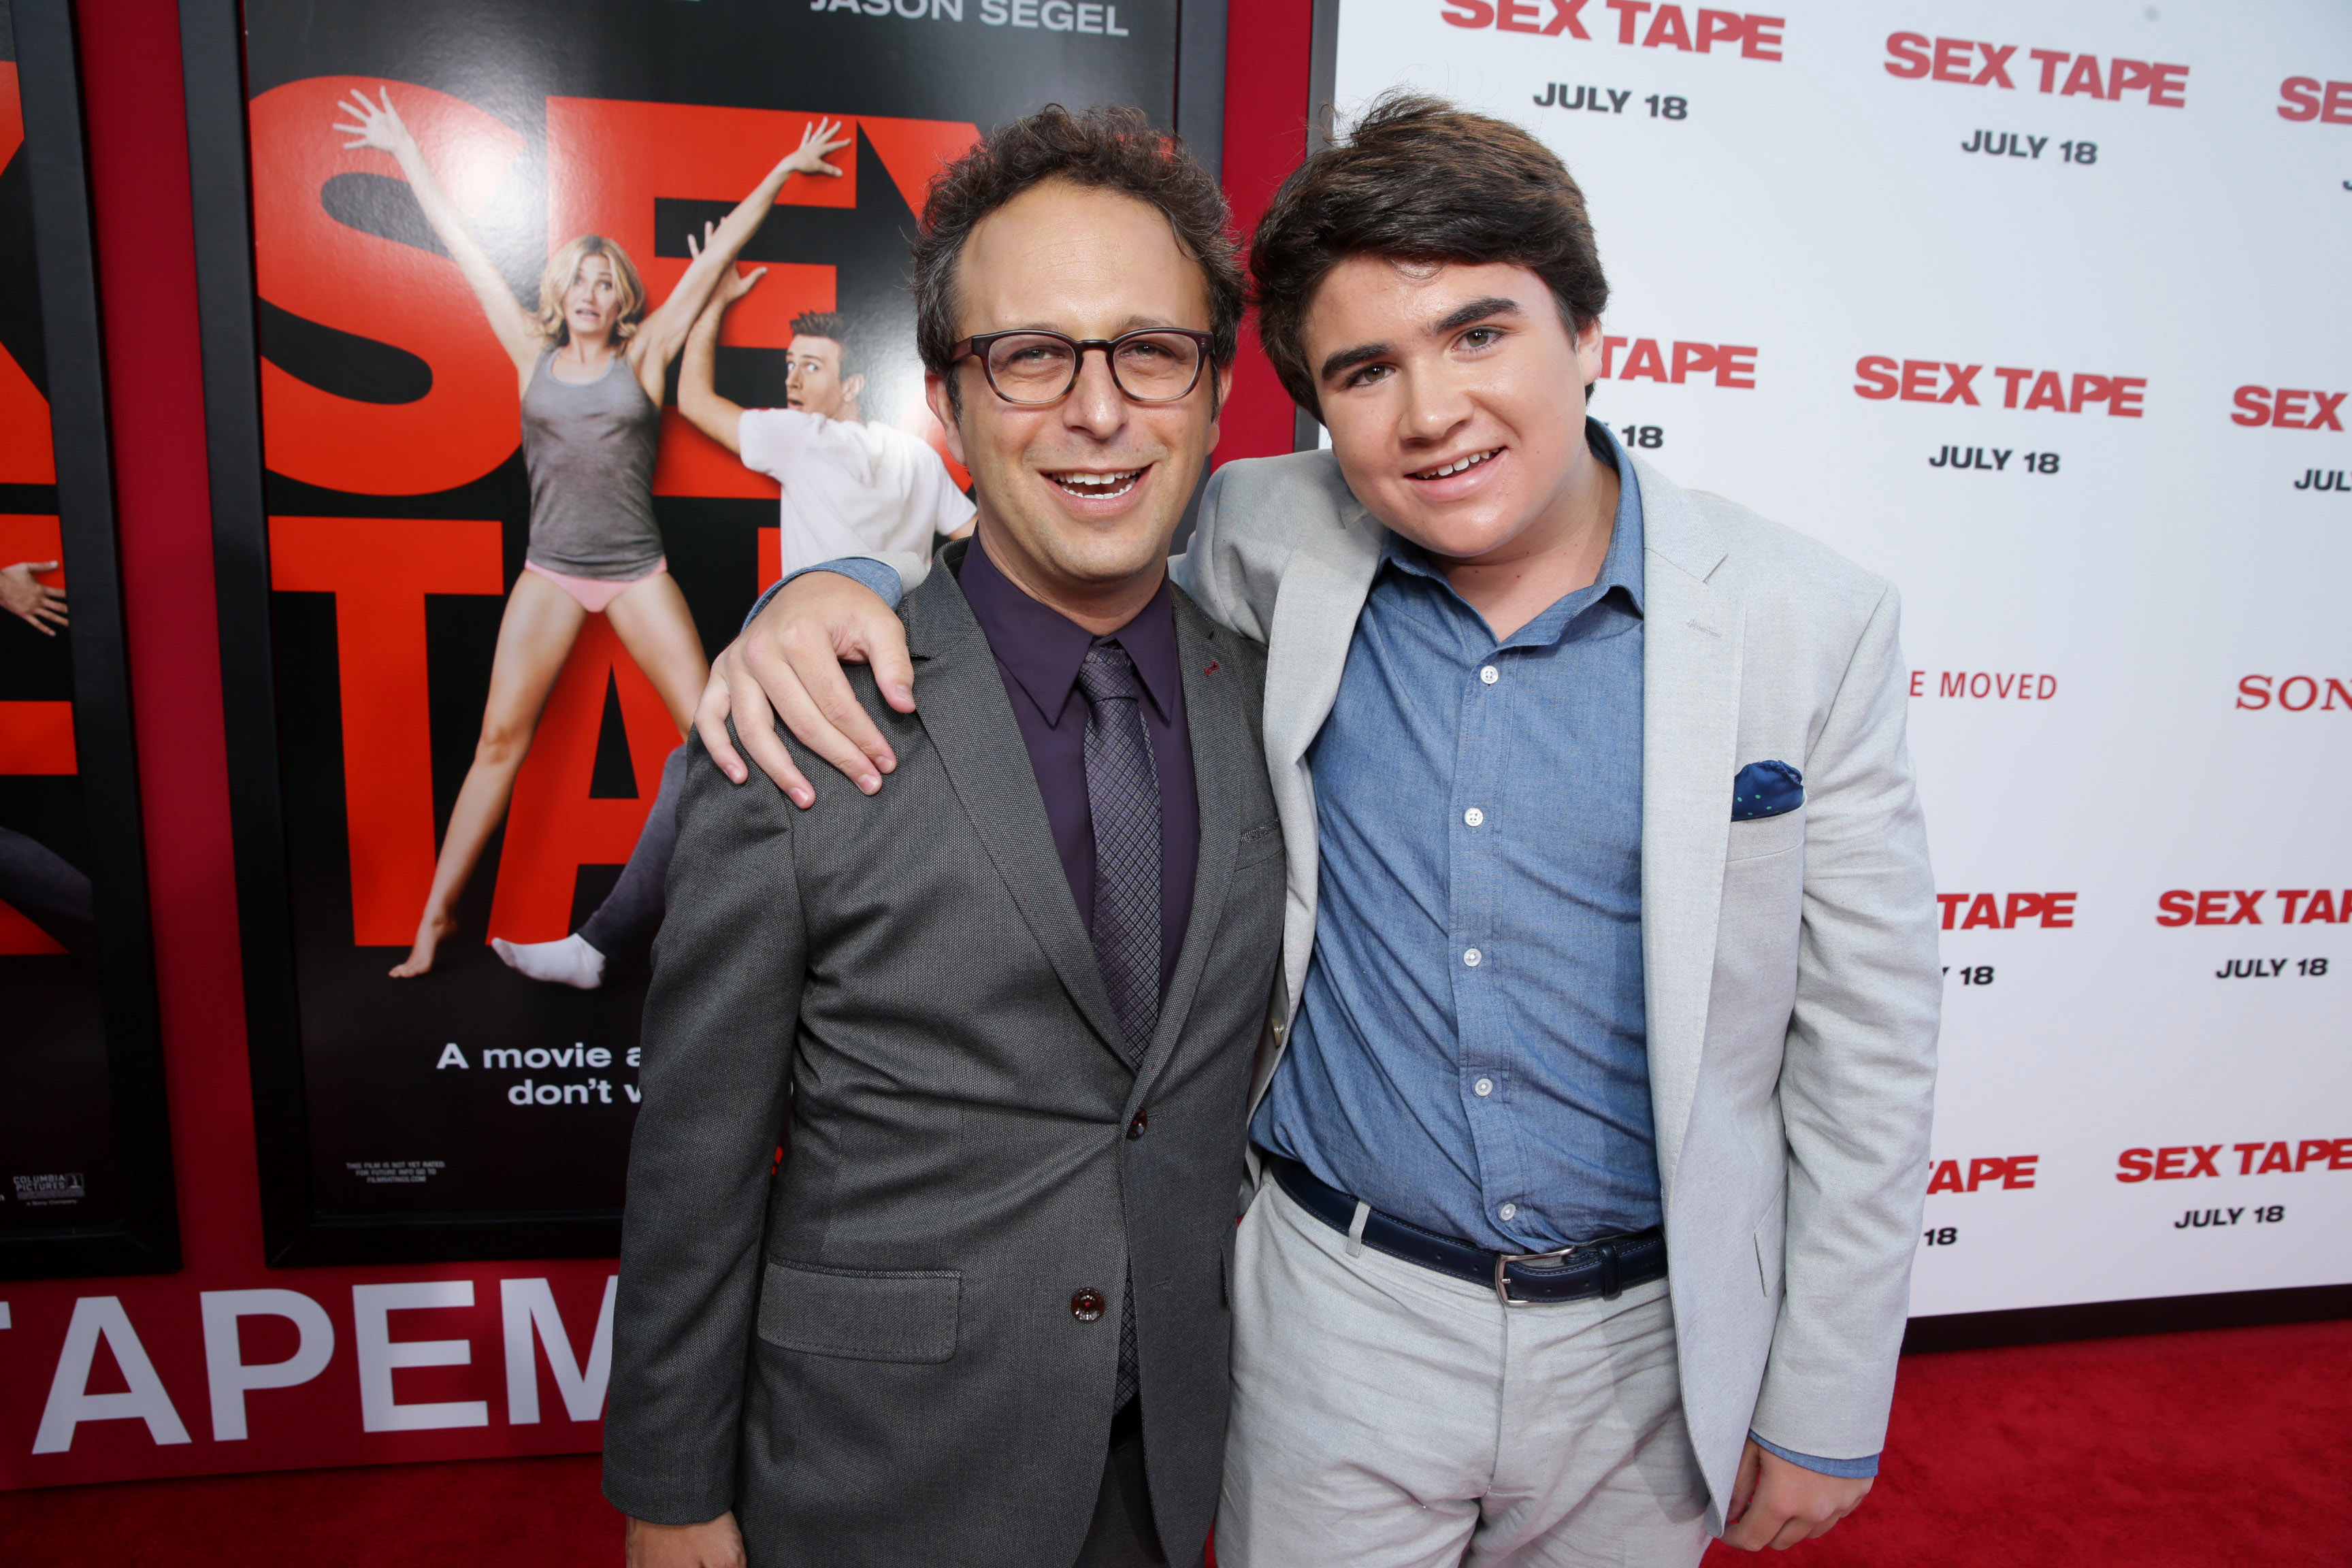 Director / Screenwriter Jake Kasdan and Harrison Holzer at Columbia Pictures' Premiere of SEX TAPE.